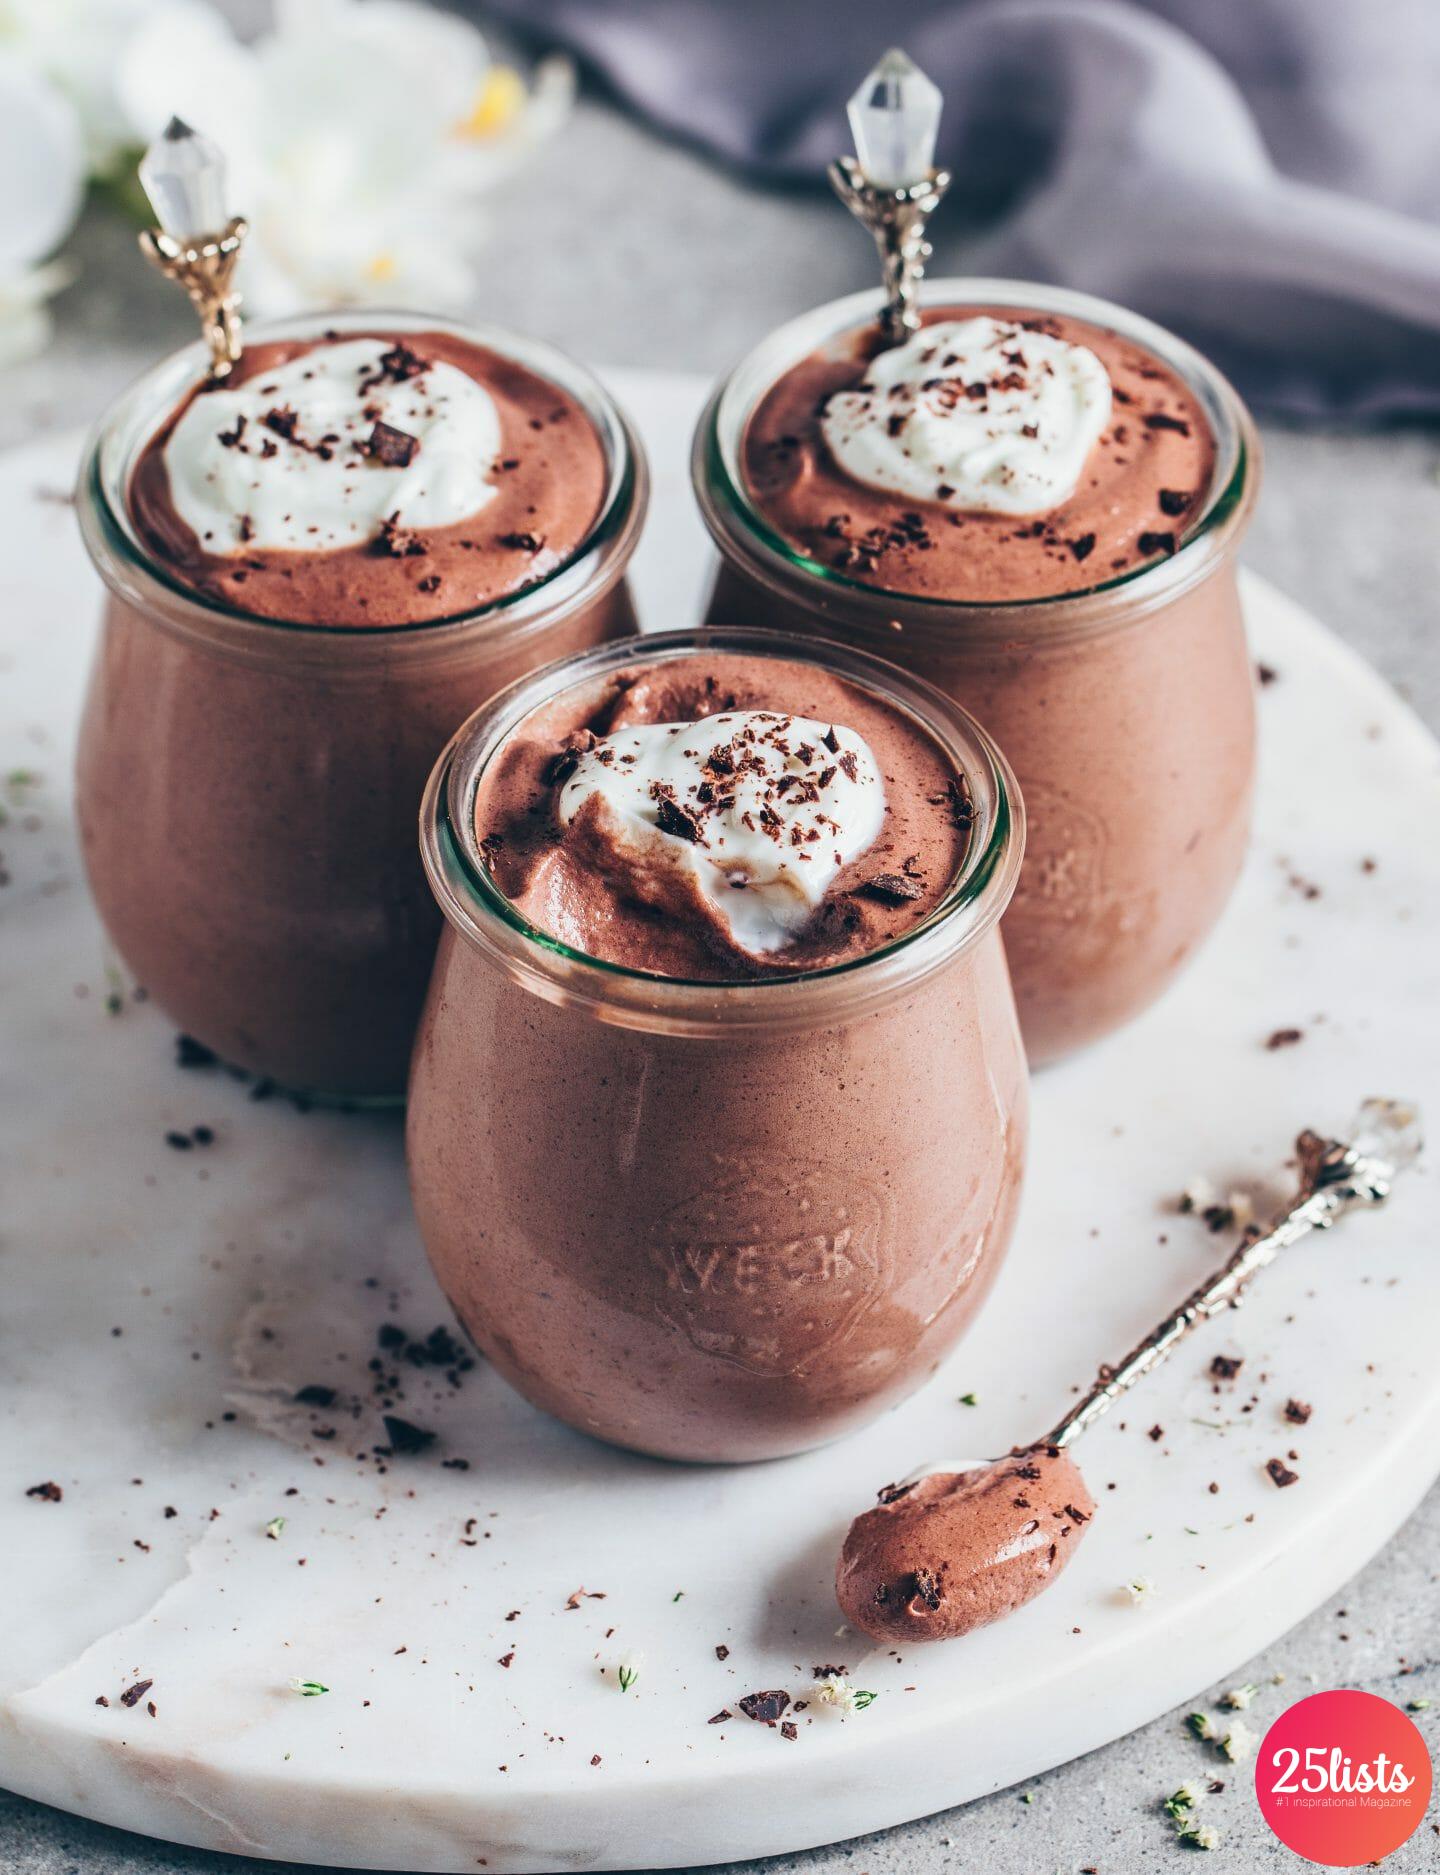 Chocolate Mousse Pudding : Recipe and best photos